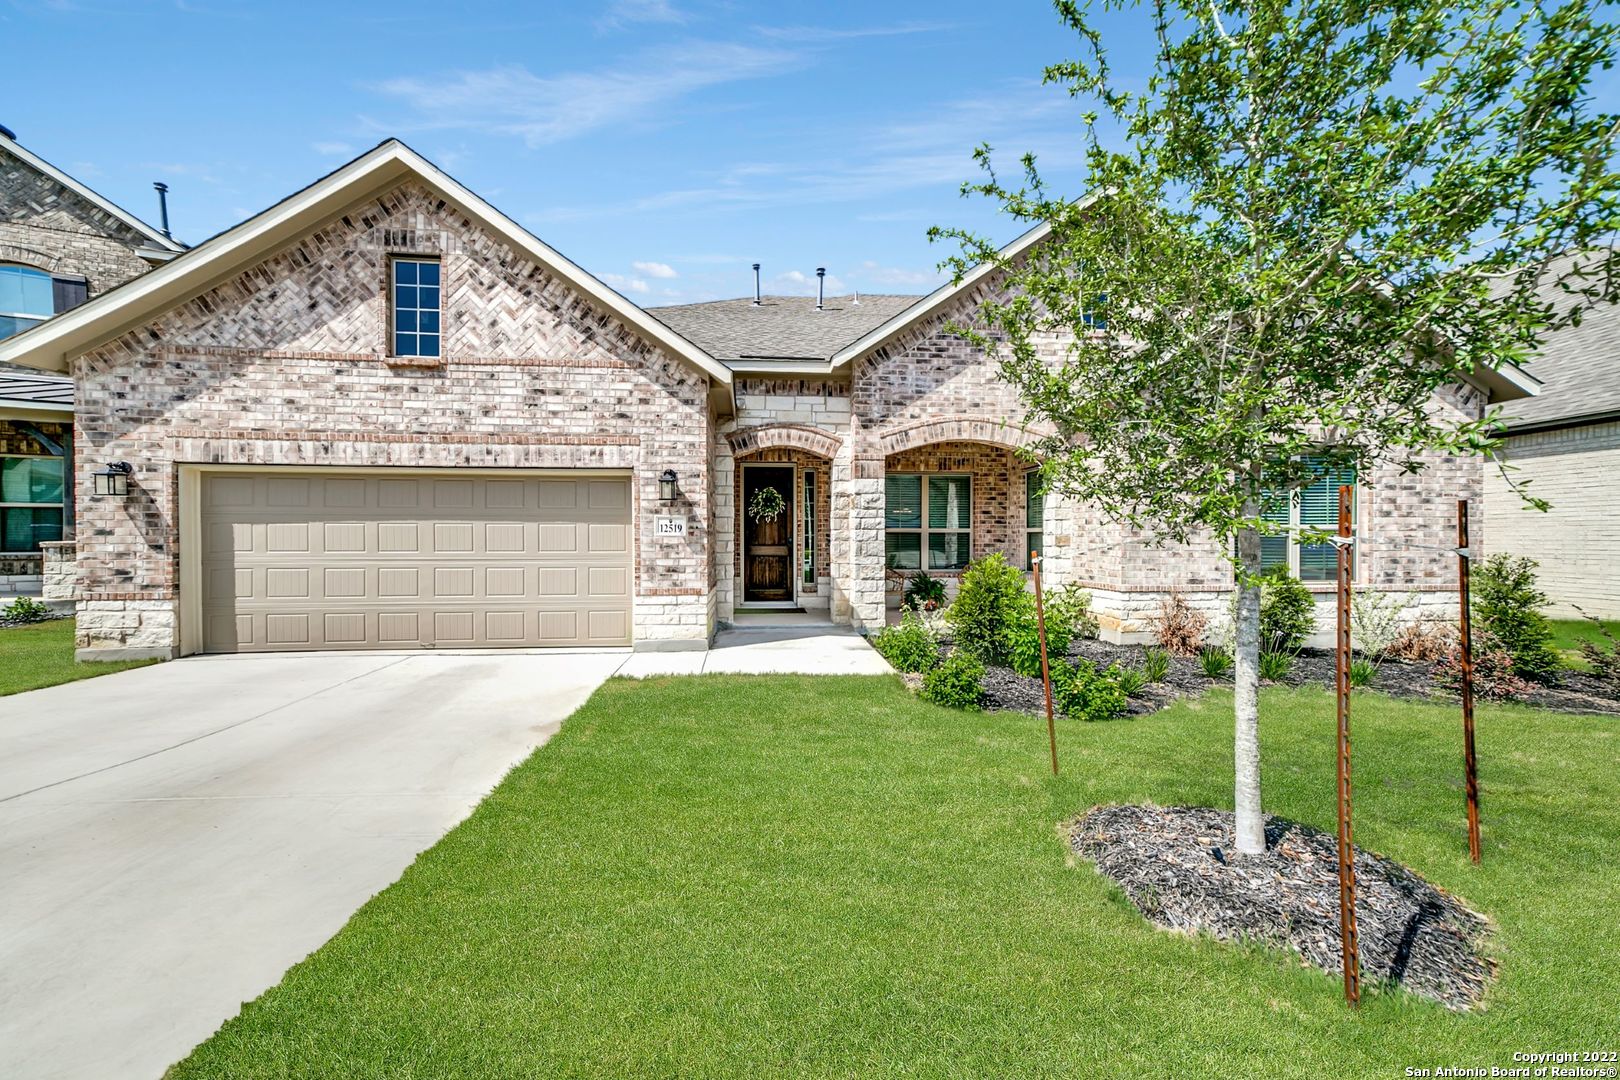 While some homes have curb appeal that are all hat and no cattle, this upscale modern hill country home in Fronterra at Westpointe has both (though you may have to peek out past your back fence to the greenbelt to see anything akin to actual cattle!). Picture yourself sipping ice tea on your welcoming front porch, waving to your new neighbors, before slipping inside through your tastefully rustic knotty alder wood front door to the cool interior-the Texas sun is no match for the UV block on these windows and AC pumped from dual units! Off the foyer, you'll find both a home office with glass french doors and a formal dining room with elegant crown molding. Light, wood-like tile and serene colors accentuate the bright, natural light of the home. Downstairs offers 4 bedrooms, including a spacious master with a tall tray ceiling, bay window, and spa-like bathroom. Home chefs will appreciate the open concept eat-in kitchen with a large island, bright, white cabinetry, granite countertops, a walk-in pantry, and built-in stainless appliances to include a gas stove top. The kitchen is highlighted by designer pendant lights and overlooks the home's centerpiece-a floor to high ceiling cut stone fireplace and hearth. A graceful wood and wrought-iron staircase leads from the living room to a game room and additional private guest bedroom upstairs. Additional custom features and amenities of the homes include 4-sided brick, a mudroom with separate utility room, a large covered patio overlooking a lush lawn (w/ sprinkler system), a water softener, and a tandem 3 car garage! This friendly neighborhood is convenient to 1604 and features a pool, playground and clubhouse.